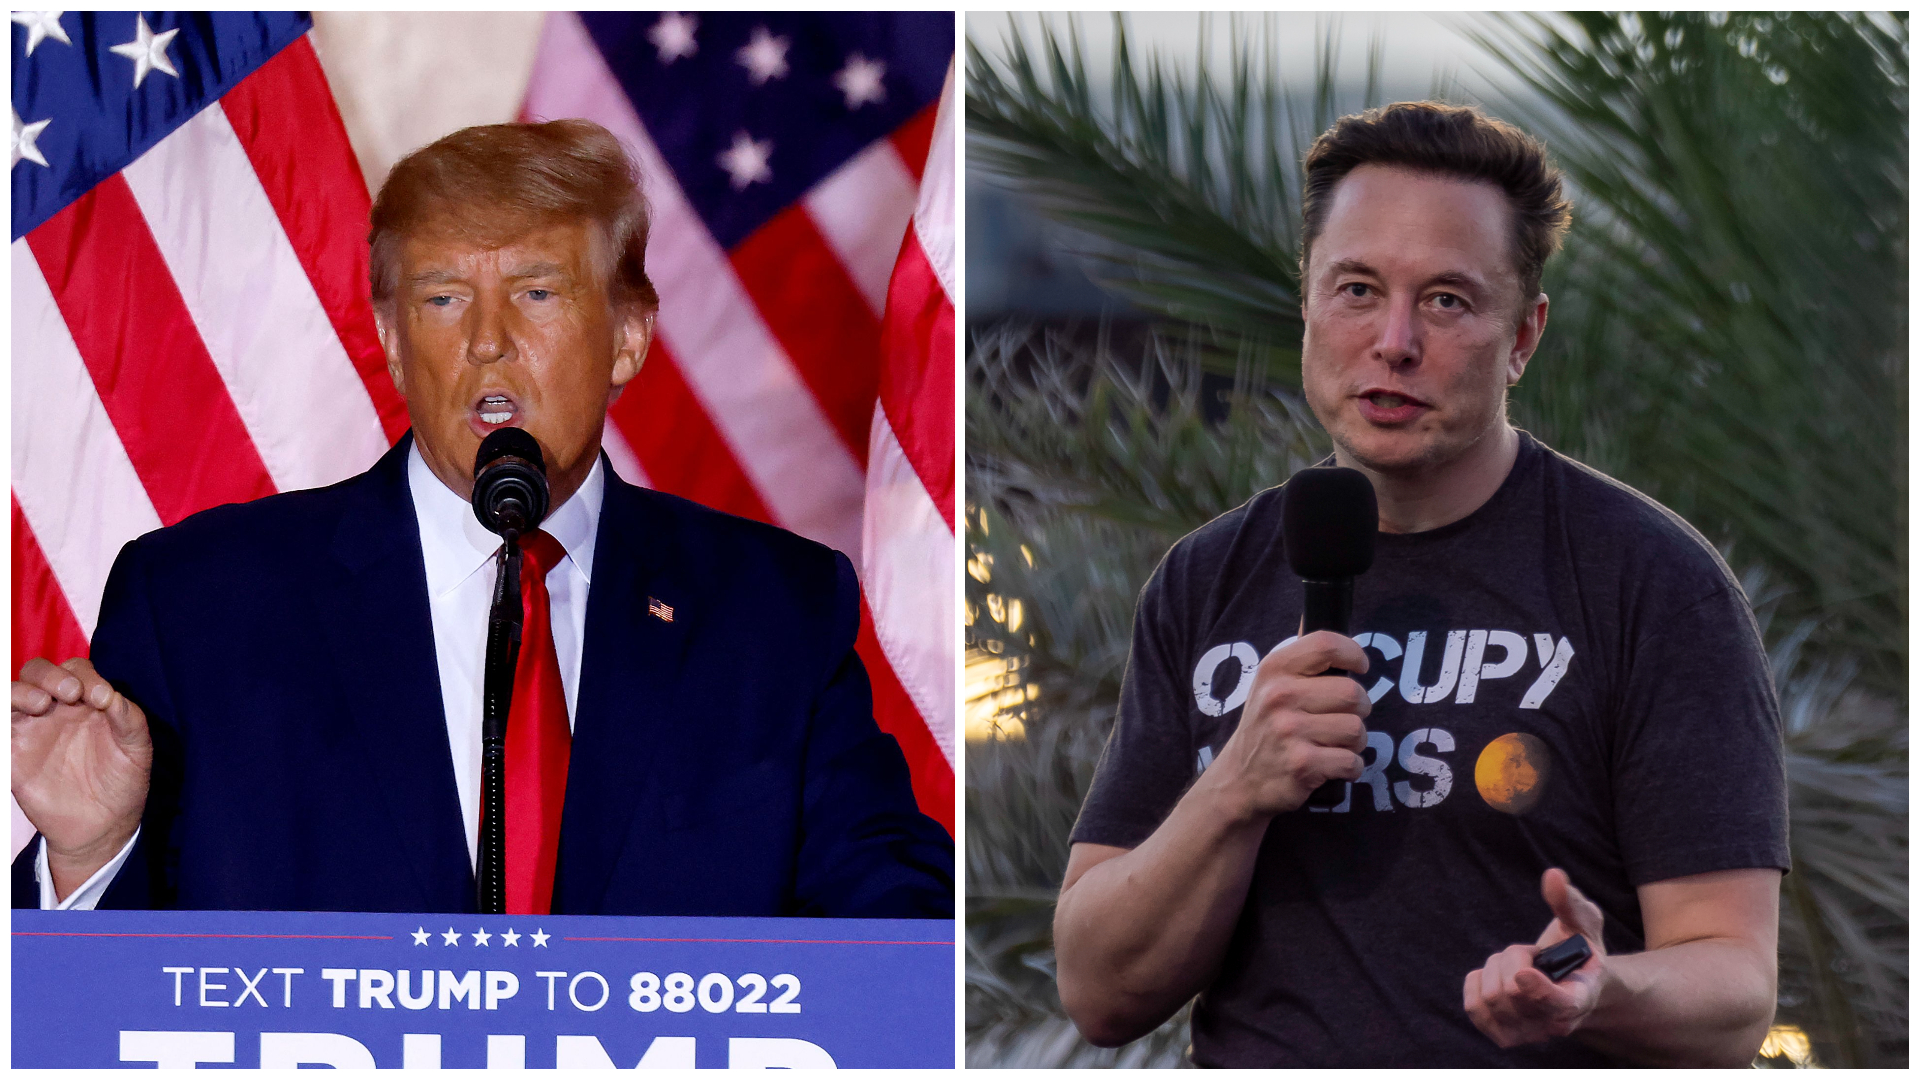 Trump Doesn’t See ‘Any Reason’ to Rejoin Twitter as Elon Musk Reinstates Twitter Account